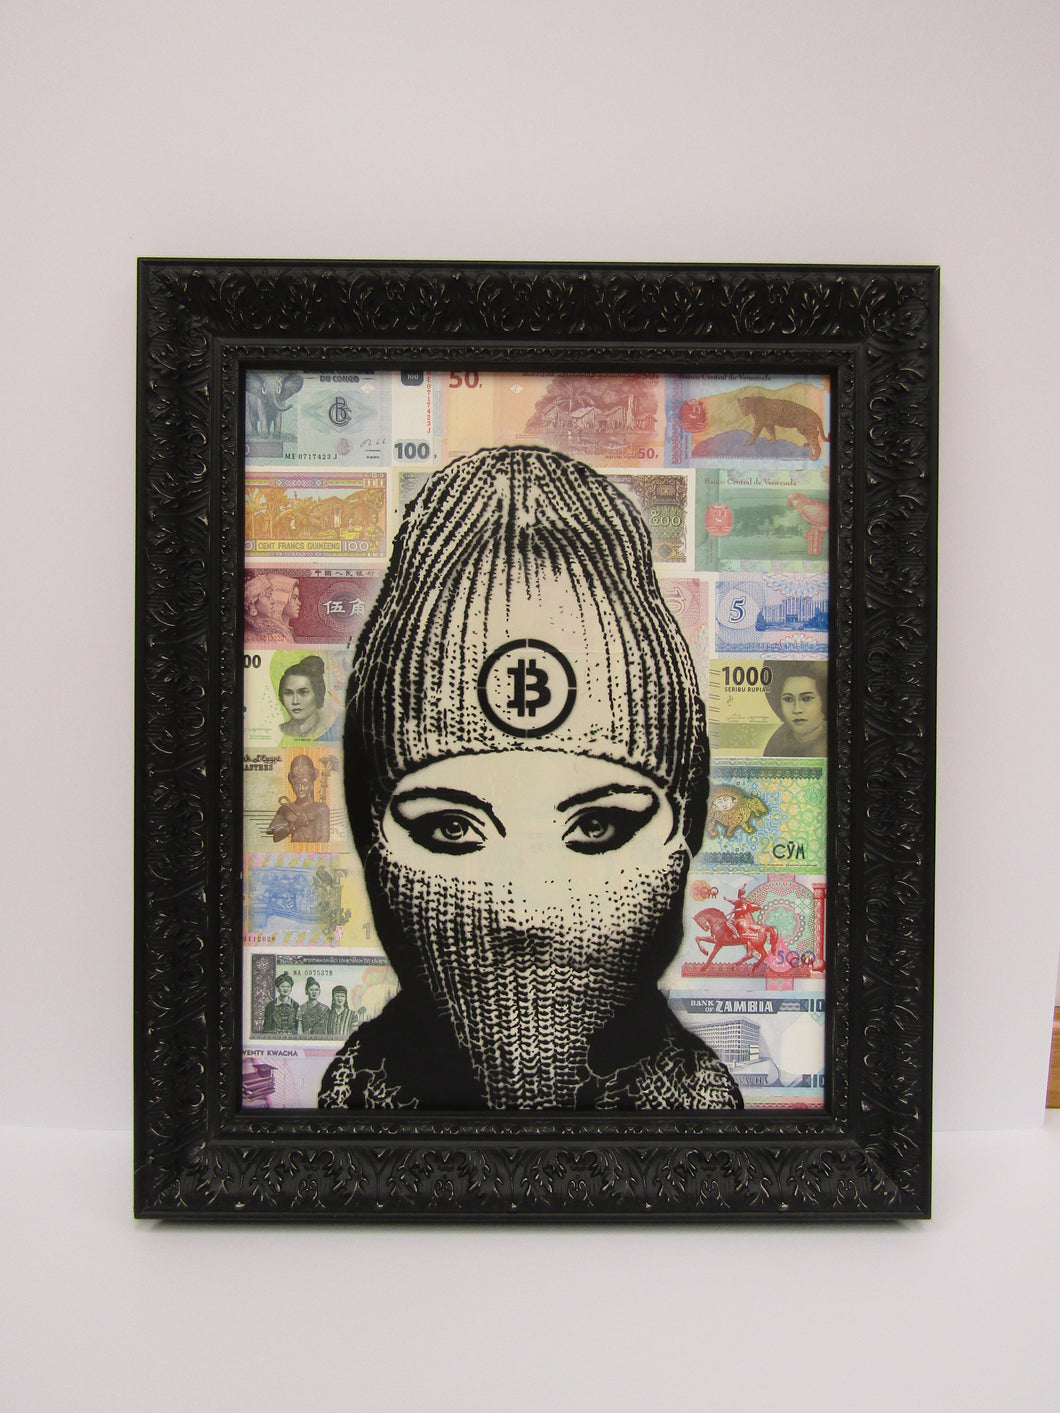 bitcoin over banknotes - 4 of 10